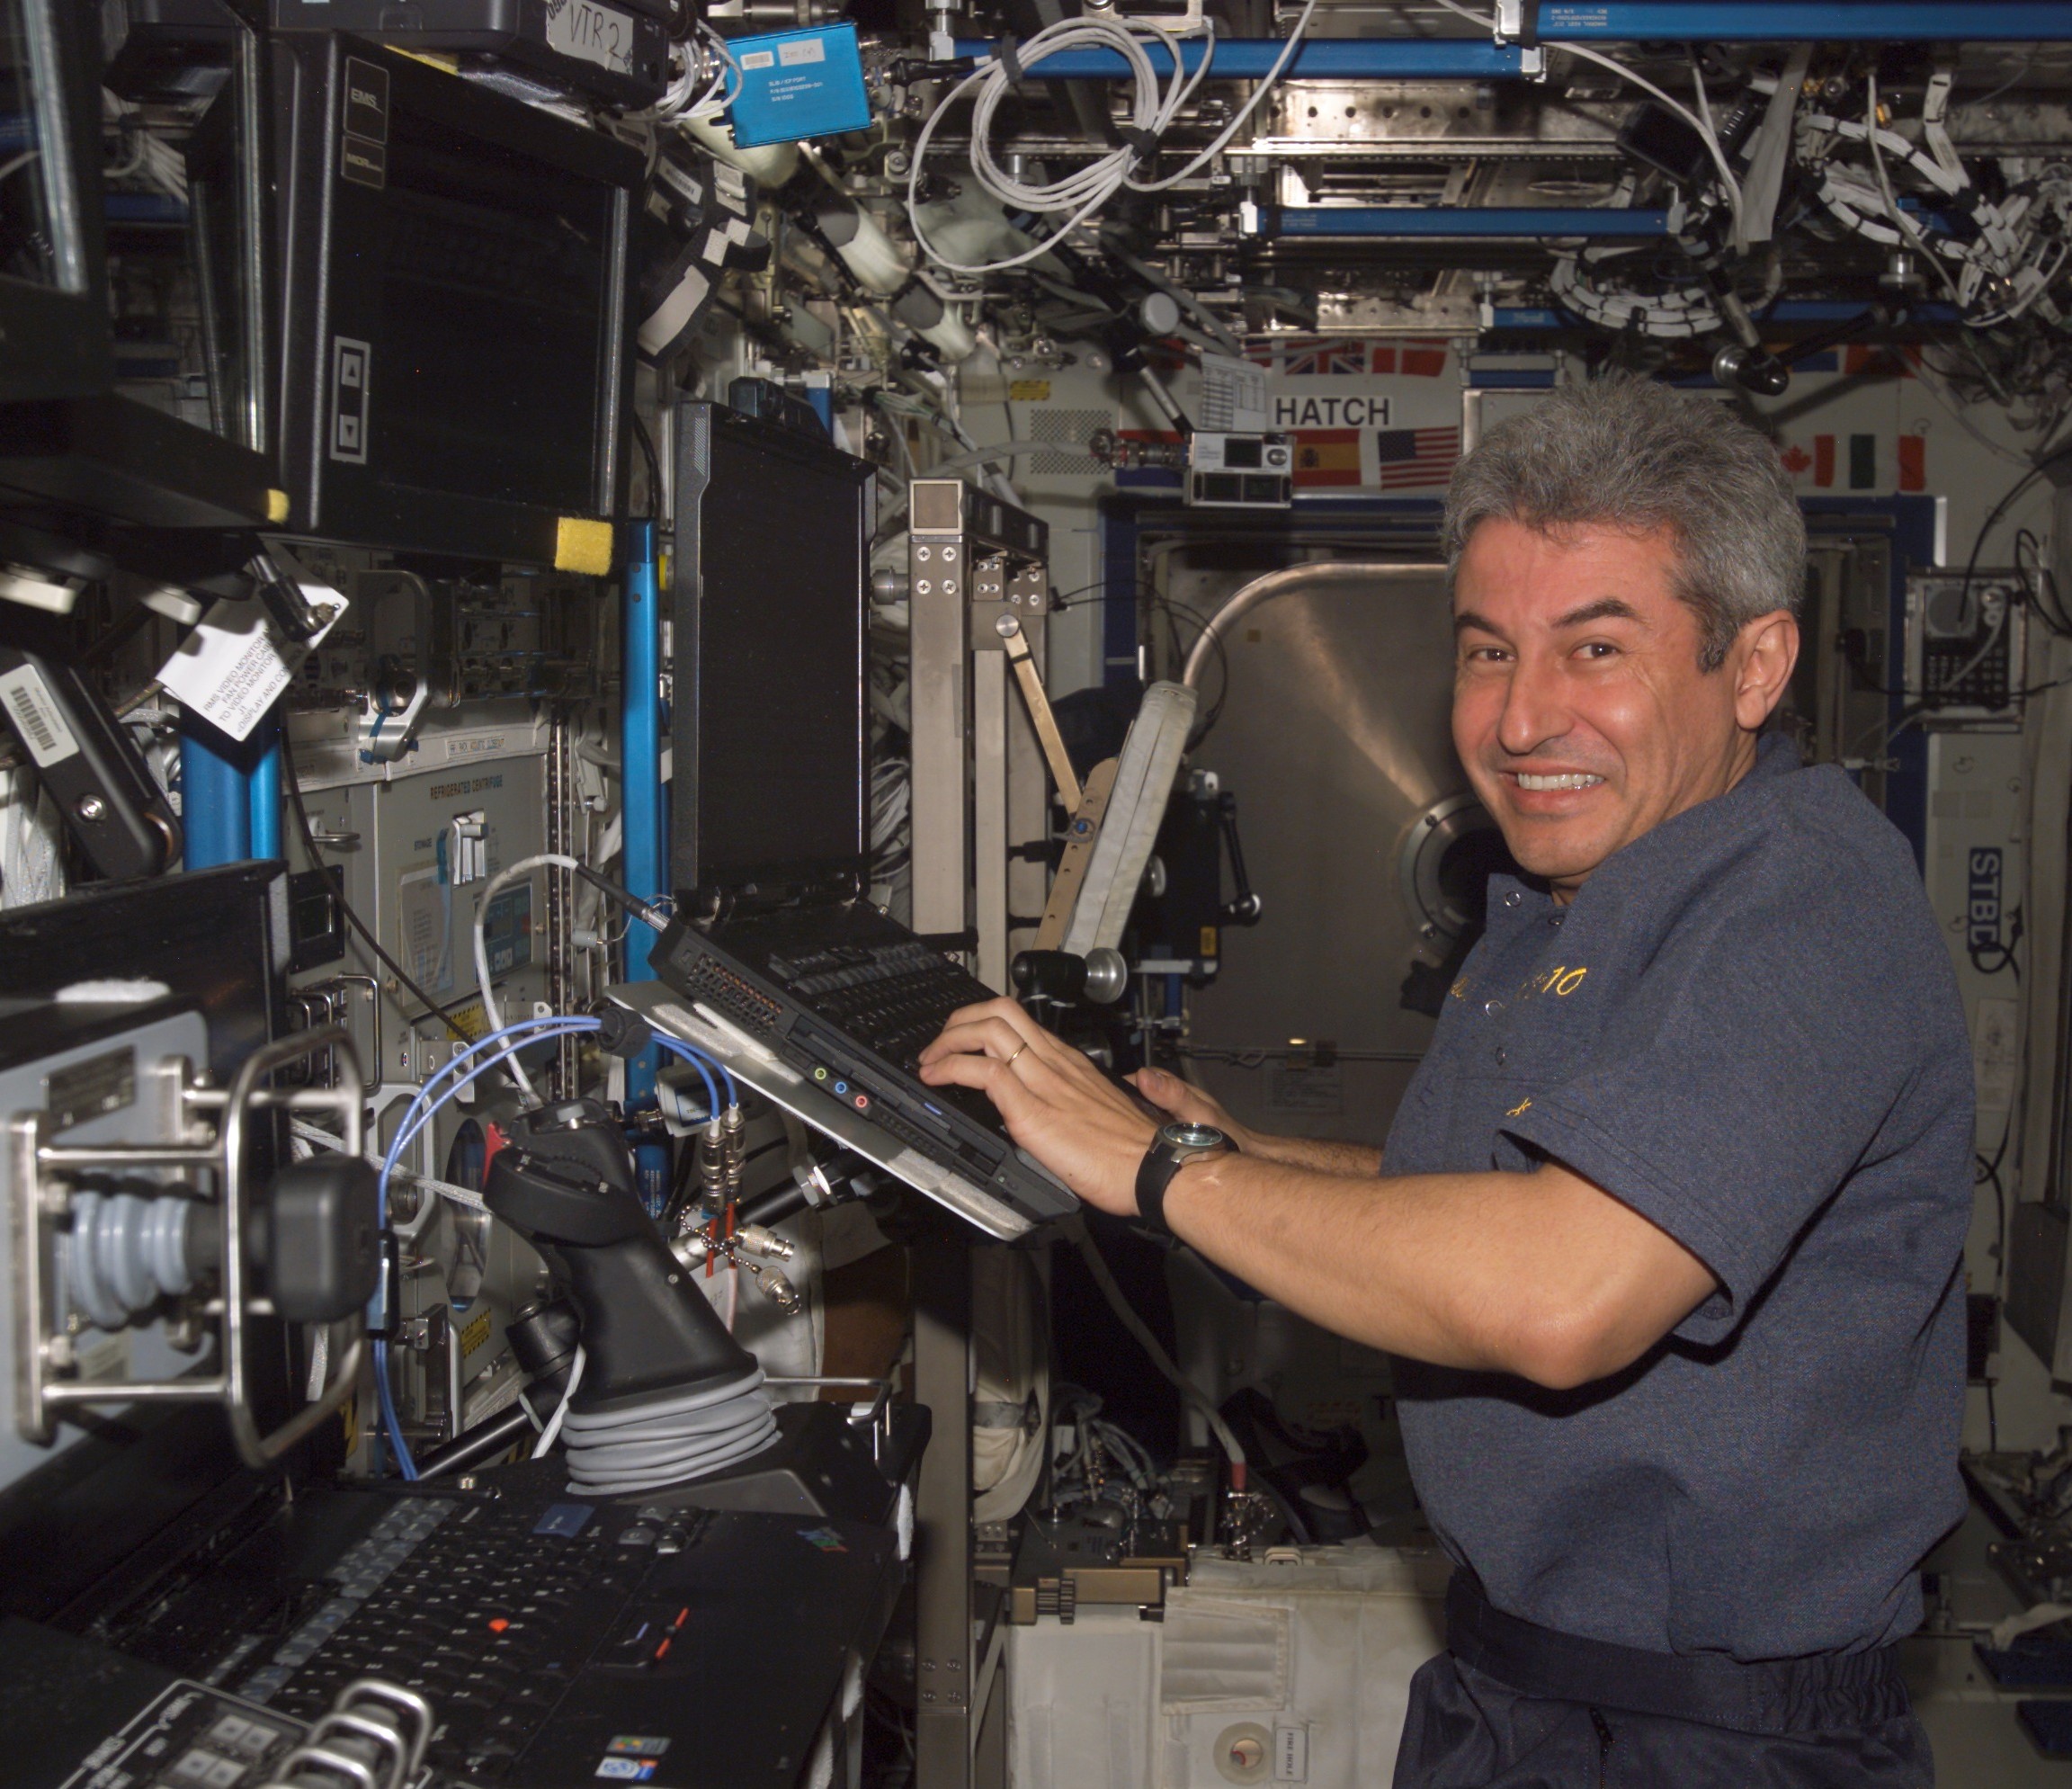 Pontes works on an experiment in the Destiny Laboratory Module